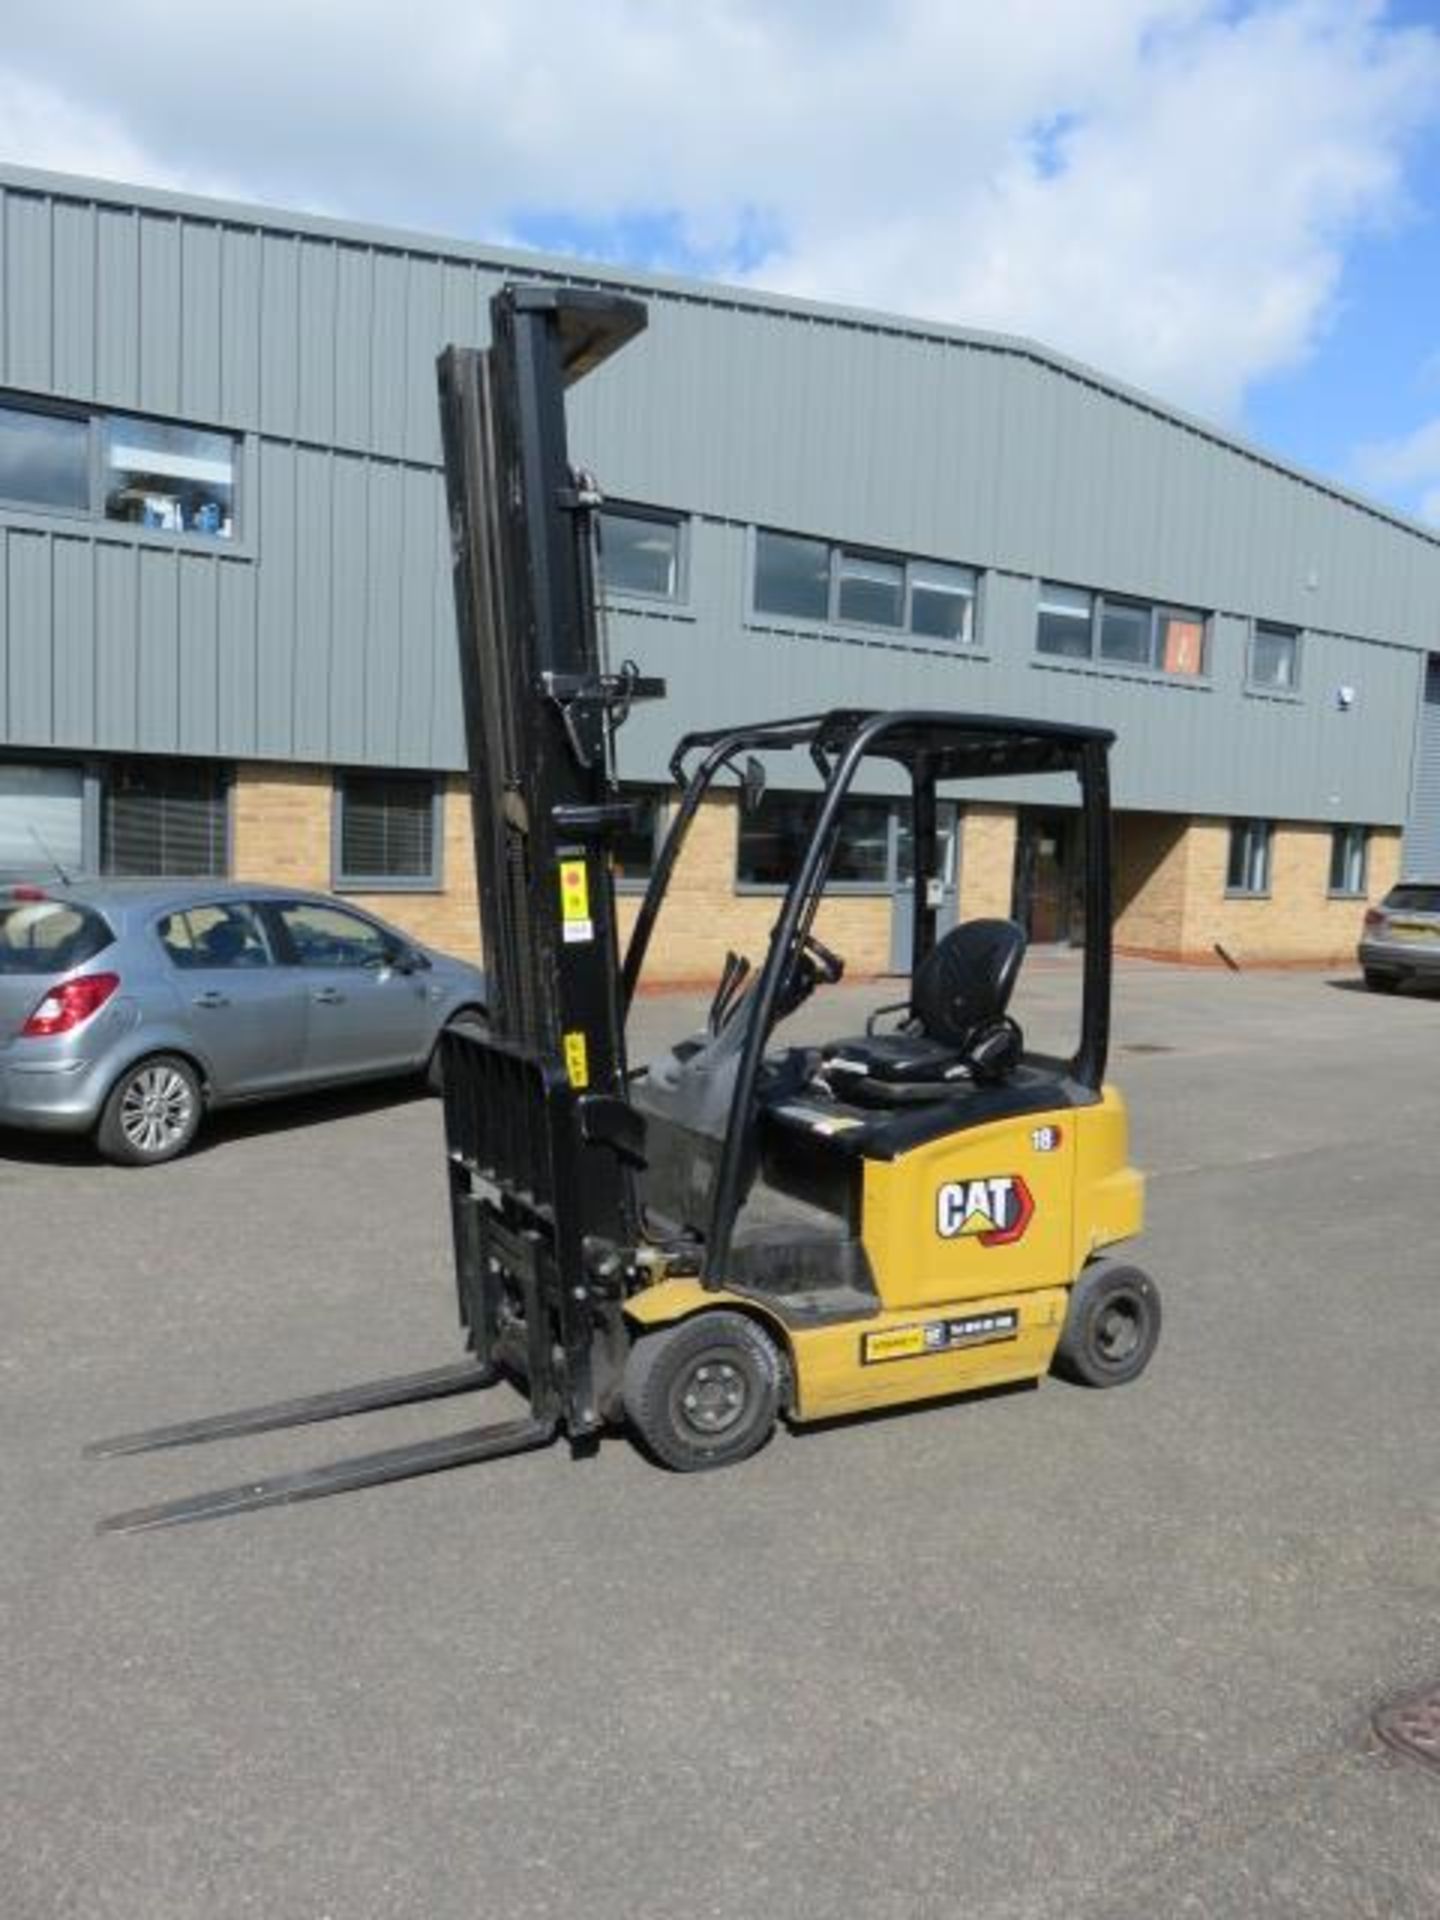 1, Caterpillar EP18 CAN Electric Forklift Truck, Serial No. ETB27A 50102 (2020) with 1800kg Capacit - Image 2 of 4